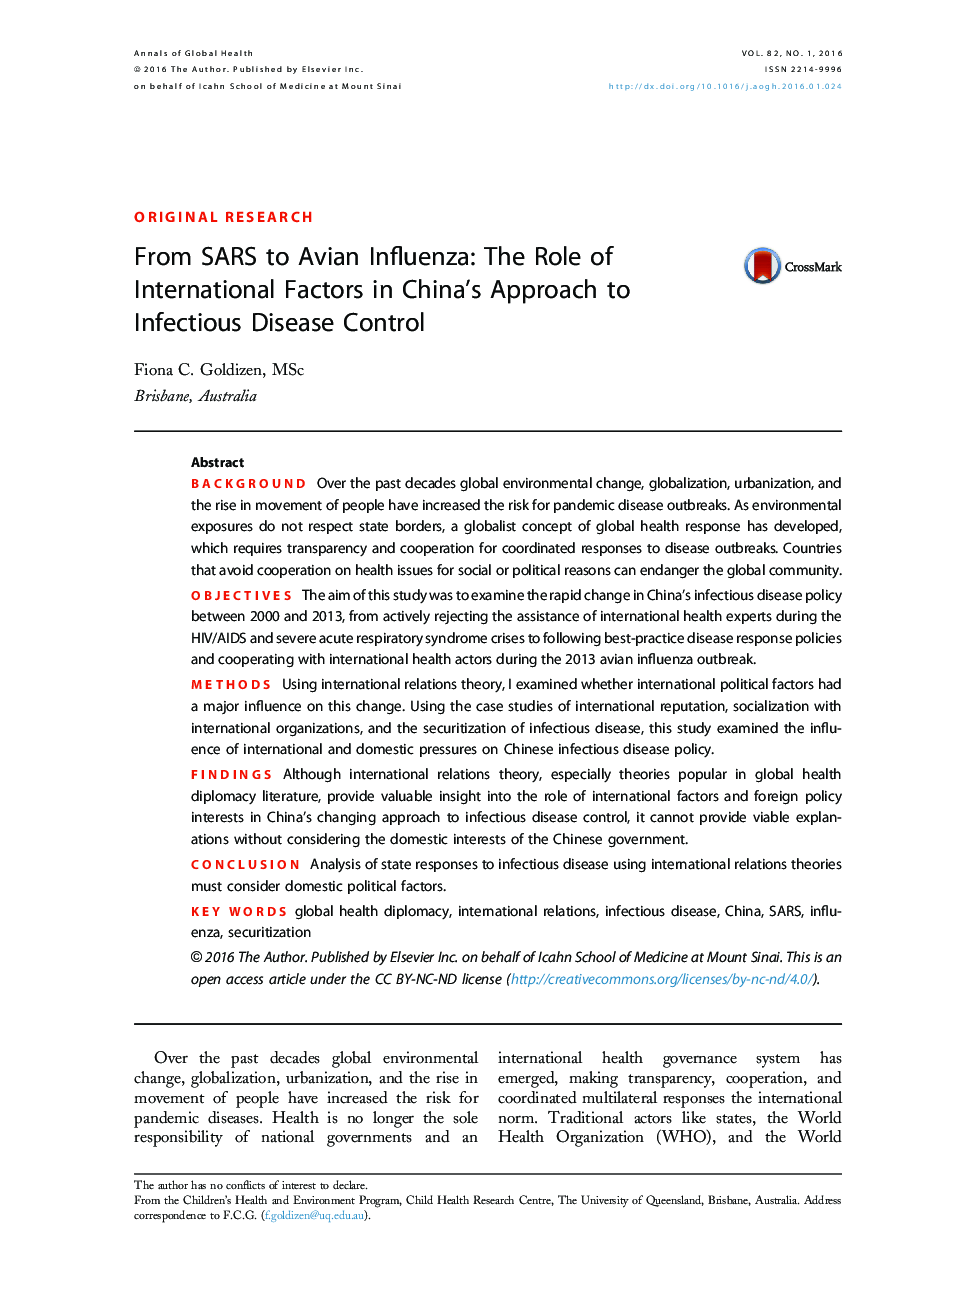 From SARS to Avian Influenza: The Role of International Factors in China's Approach to Infectious Disease Control